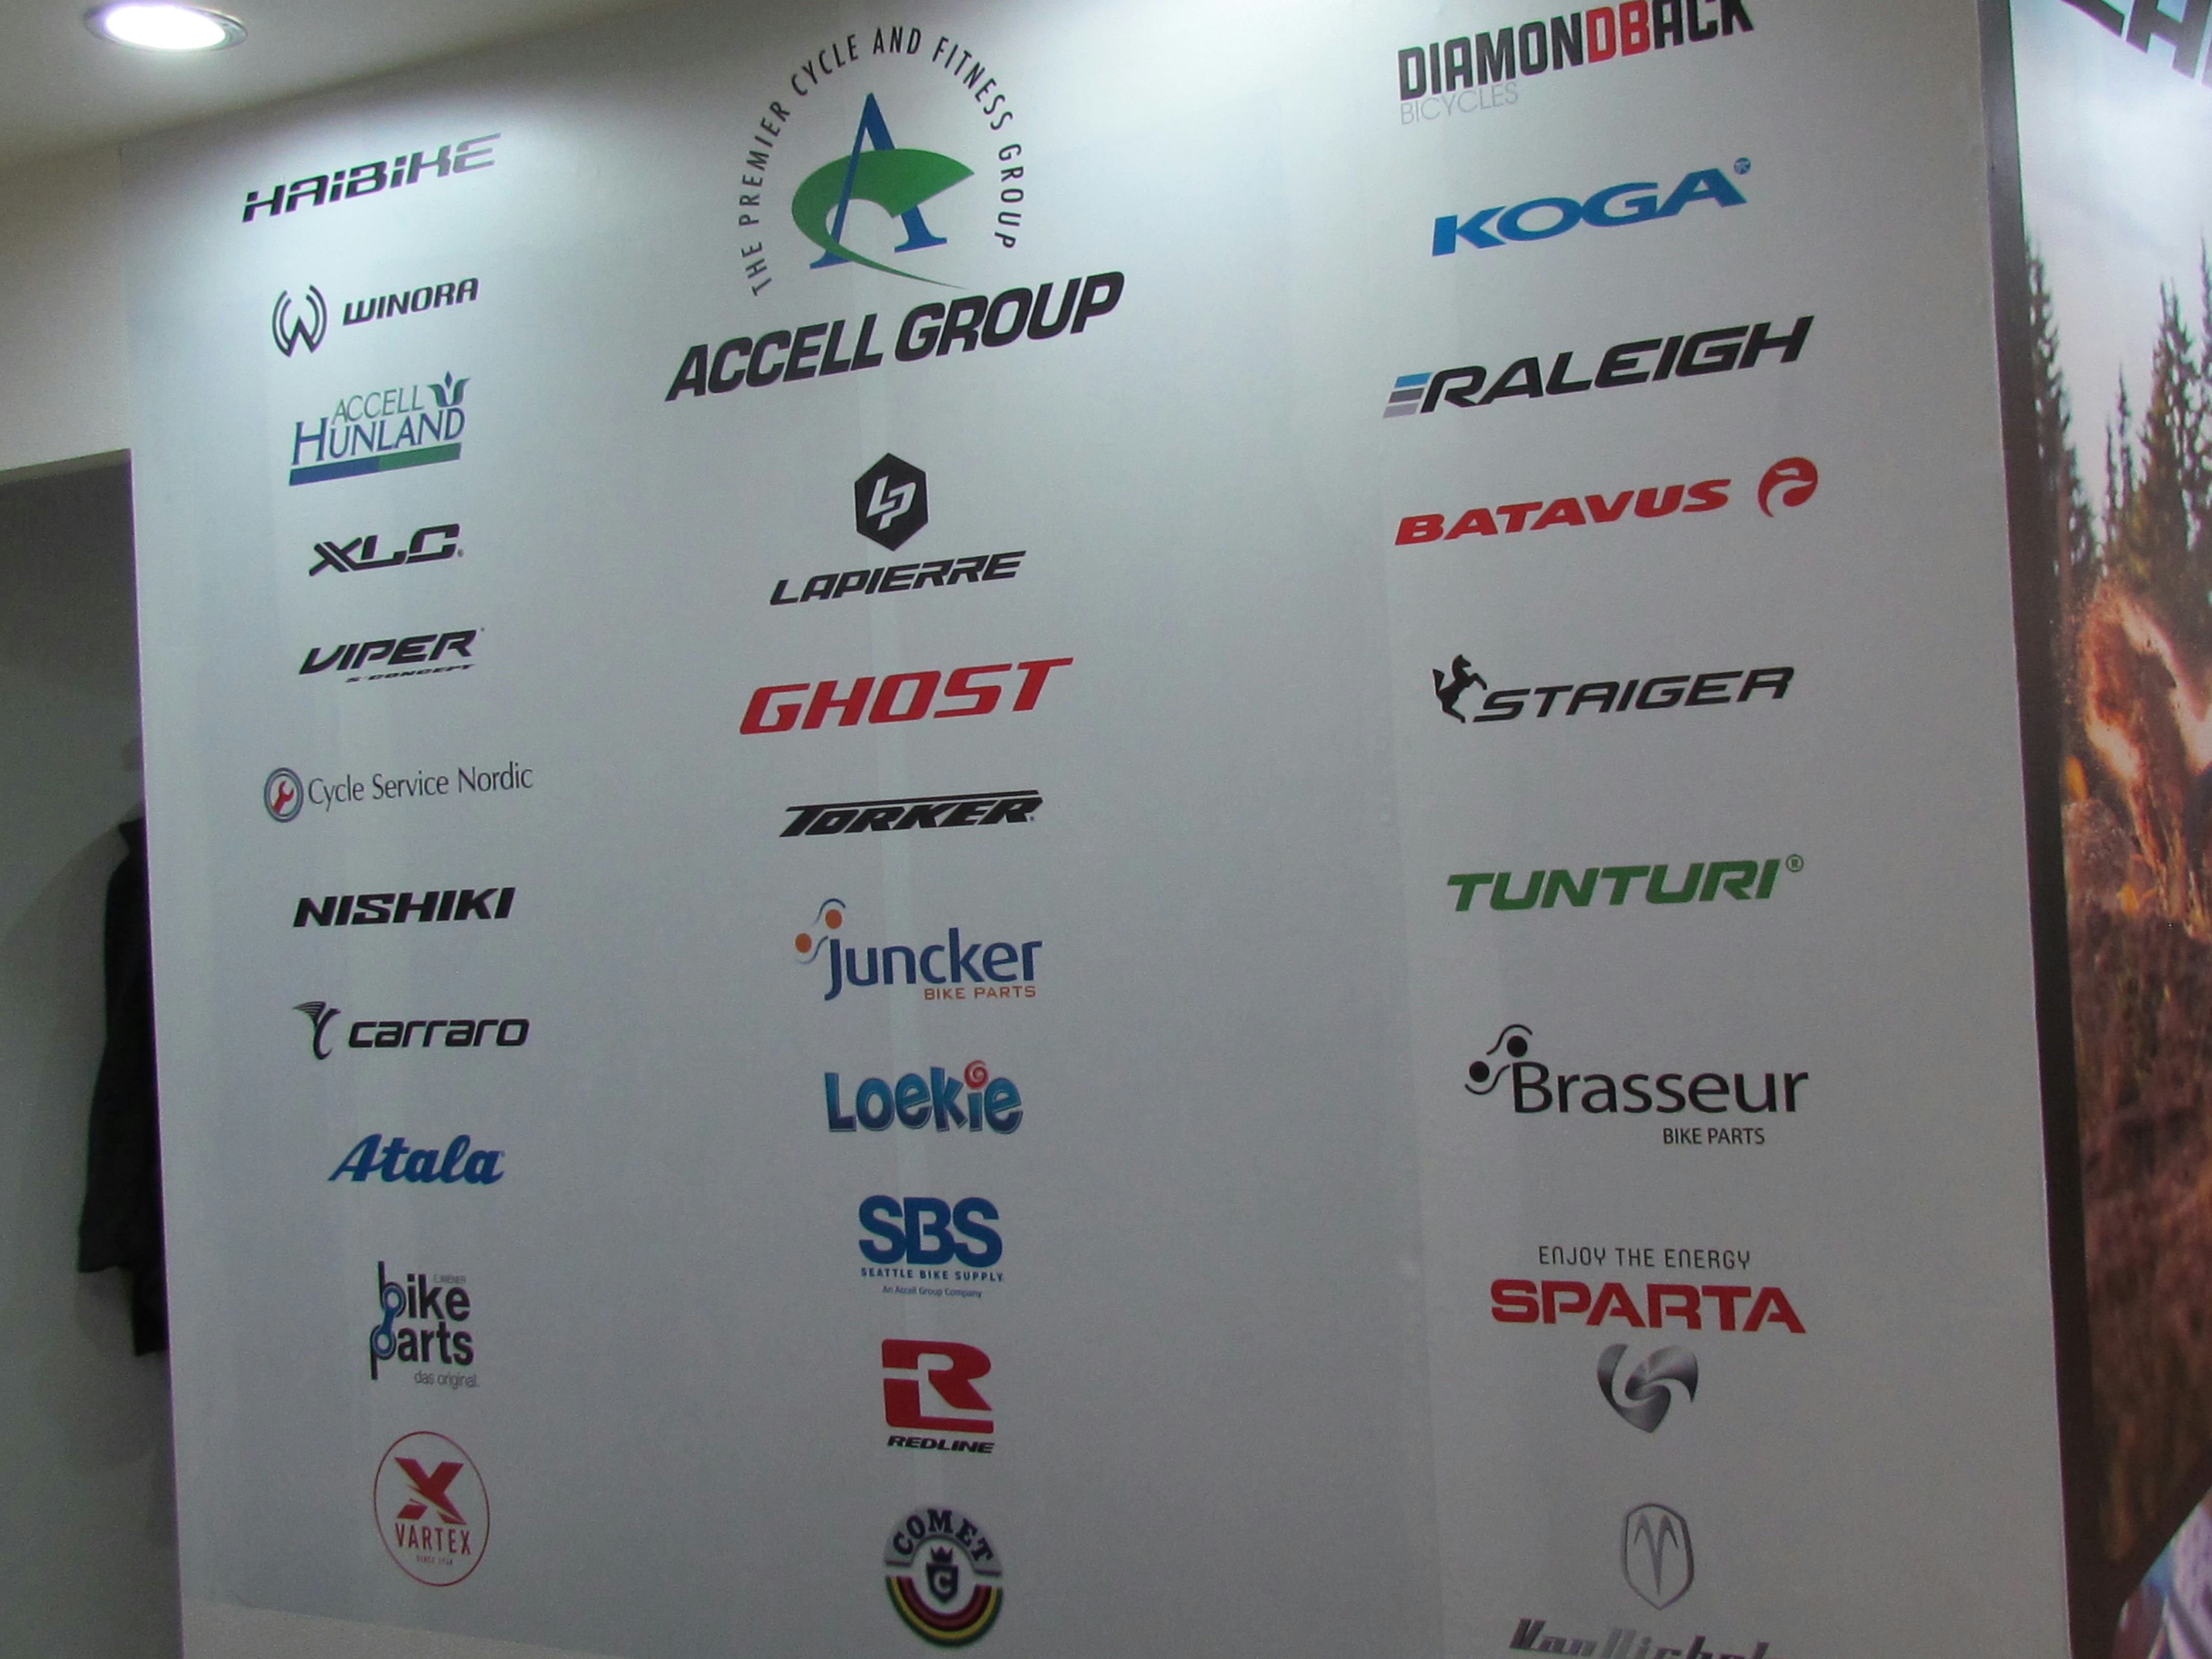 In the US, Accell Group wants to increase focus on its core business with own brands bicycles and related merchandising products. - Photo Bike Europe